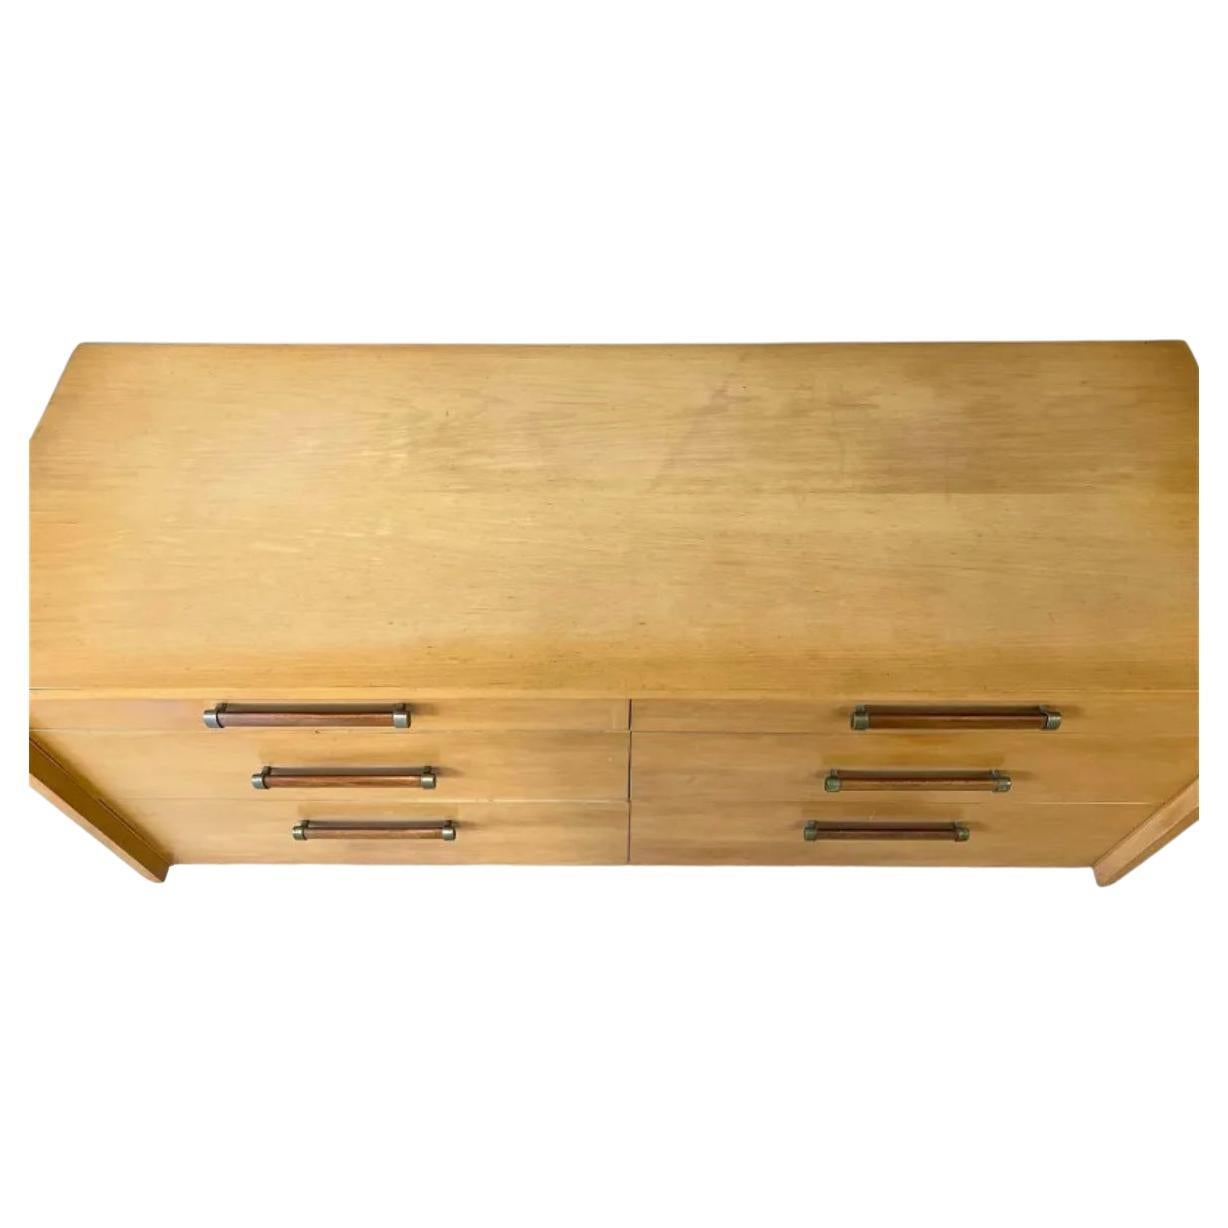 Mid-Century Modern American of Martinsville 6 drawer low dresser or credenza. A Merton Gershun for American of Martinsville Urban Suburban dresser. All Original Vintage condition - Blonde maple shows wear - Walnut and brass handles. All drawers